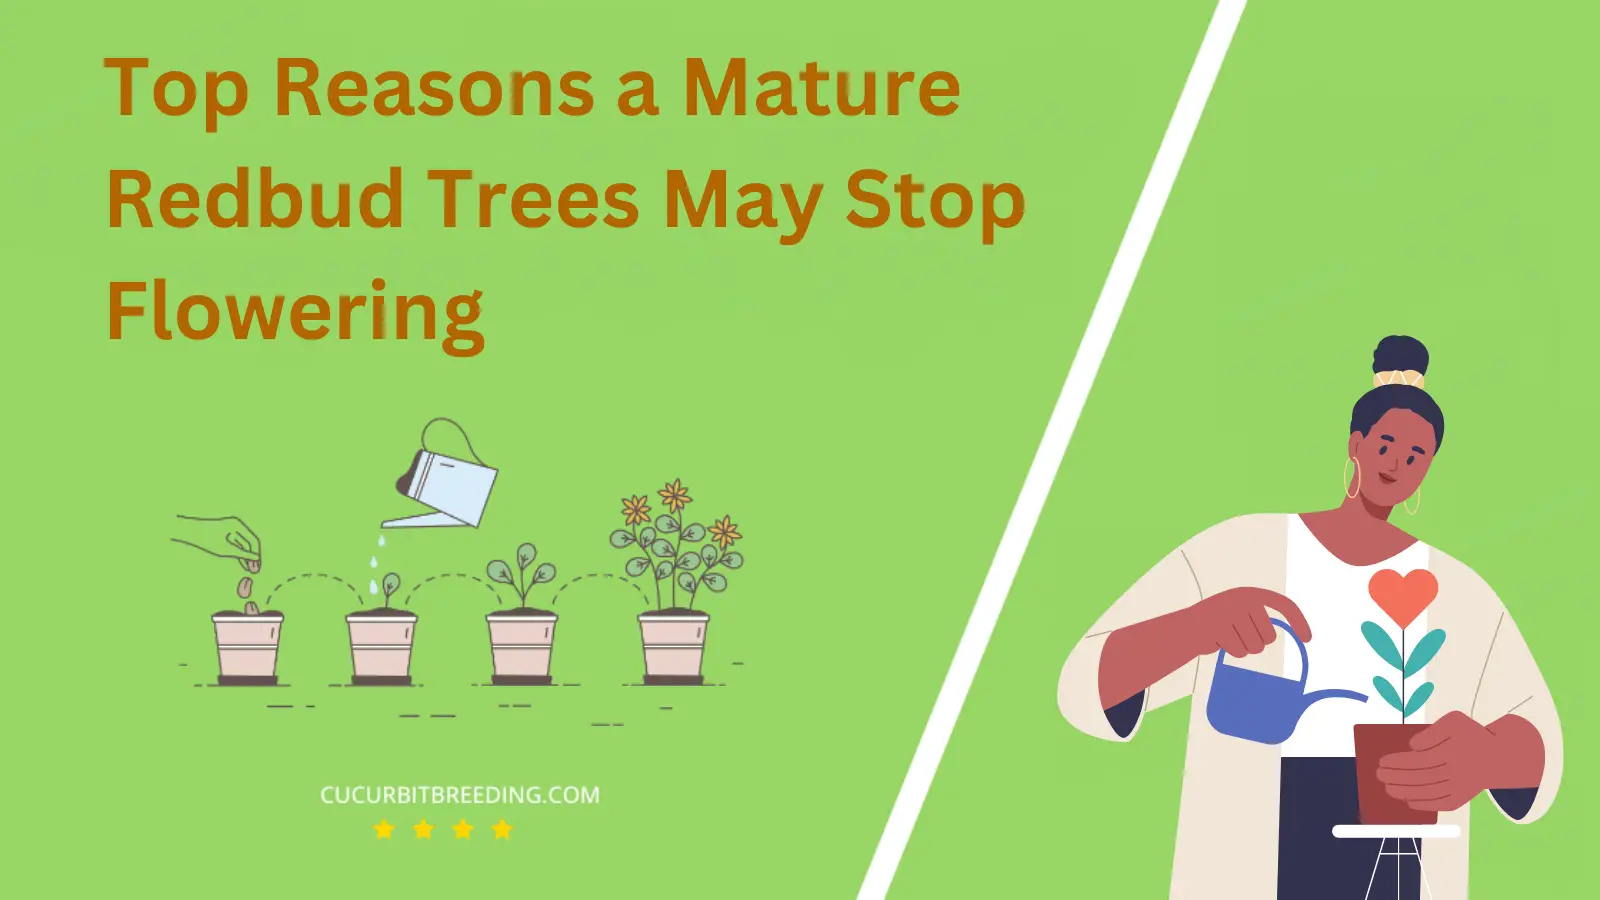 Top Reasons a Mature Redbud Trees May Stop Flowering